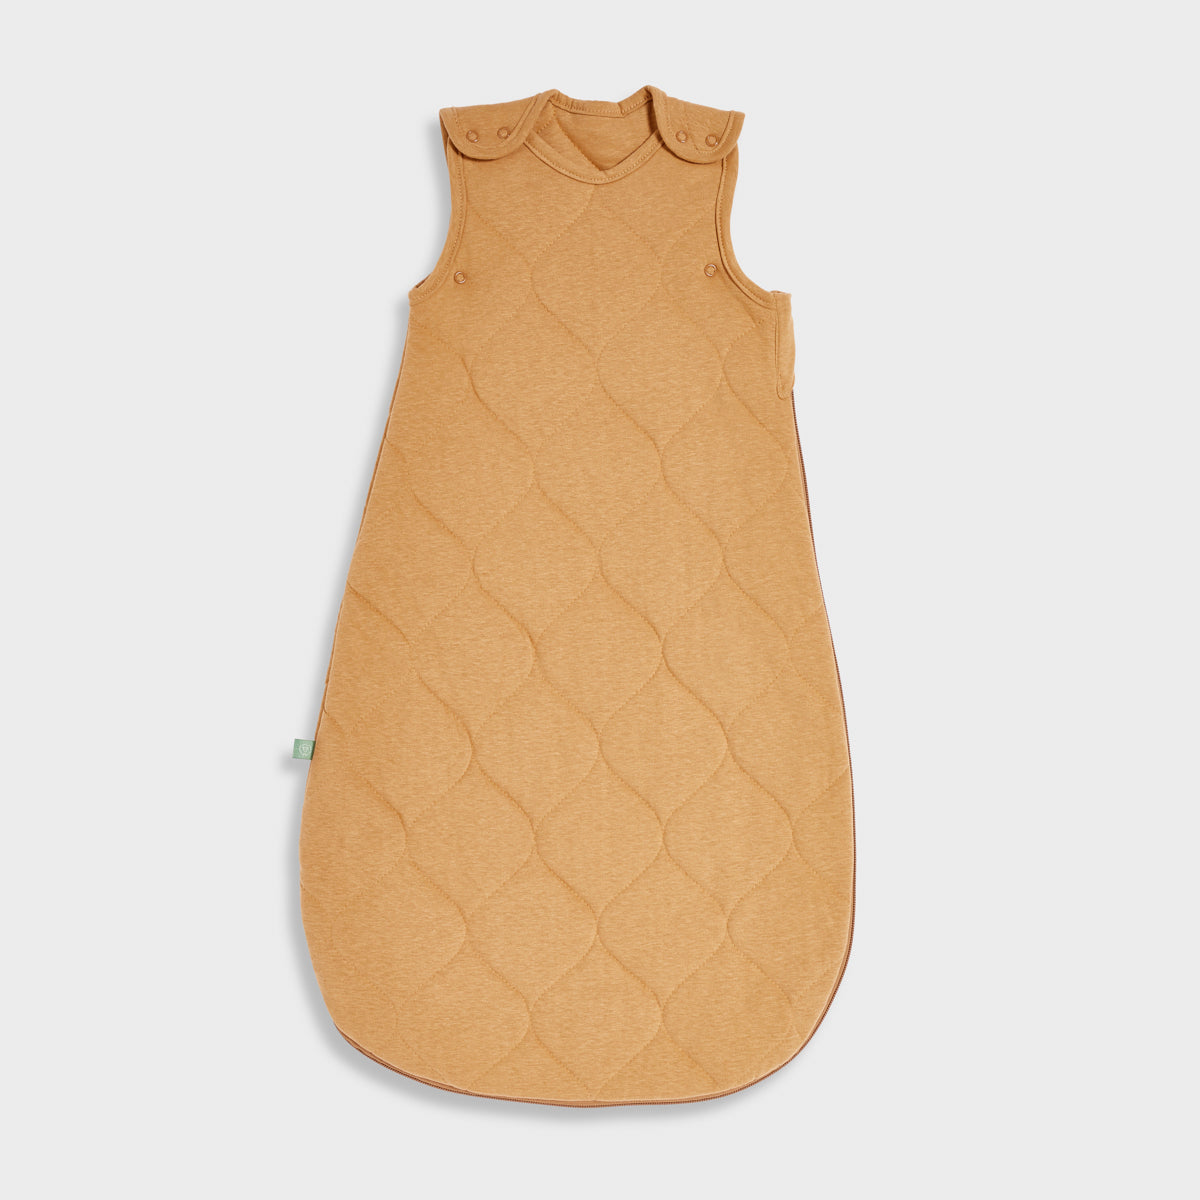 The Little Green Sheep Organic baby sleeping bag - 2.5 tog 2.5 Tog 0-6 months / Quilted Honey - Hola BB